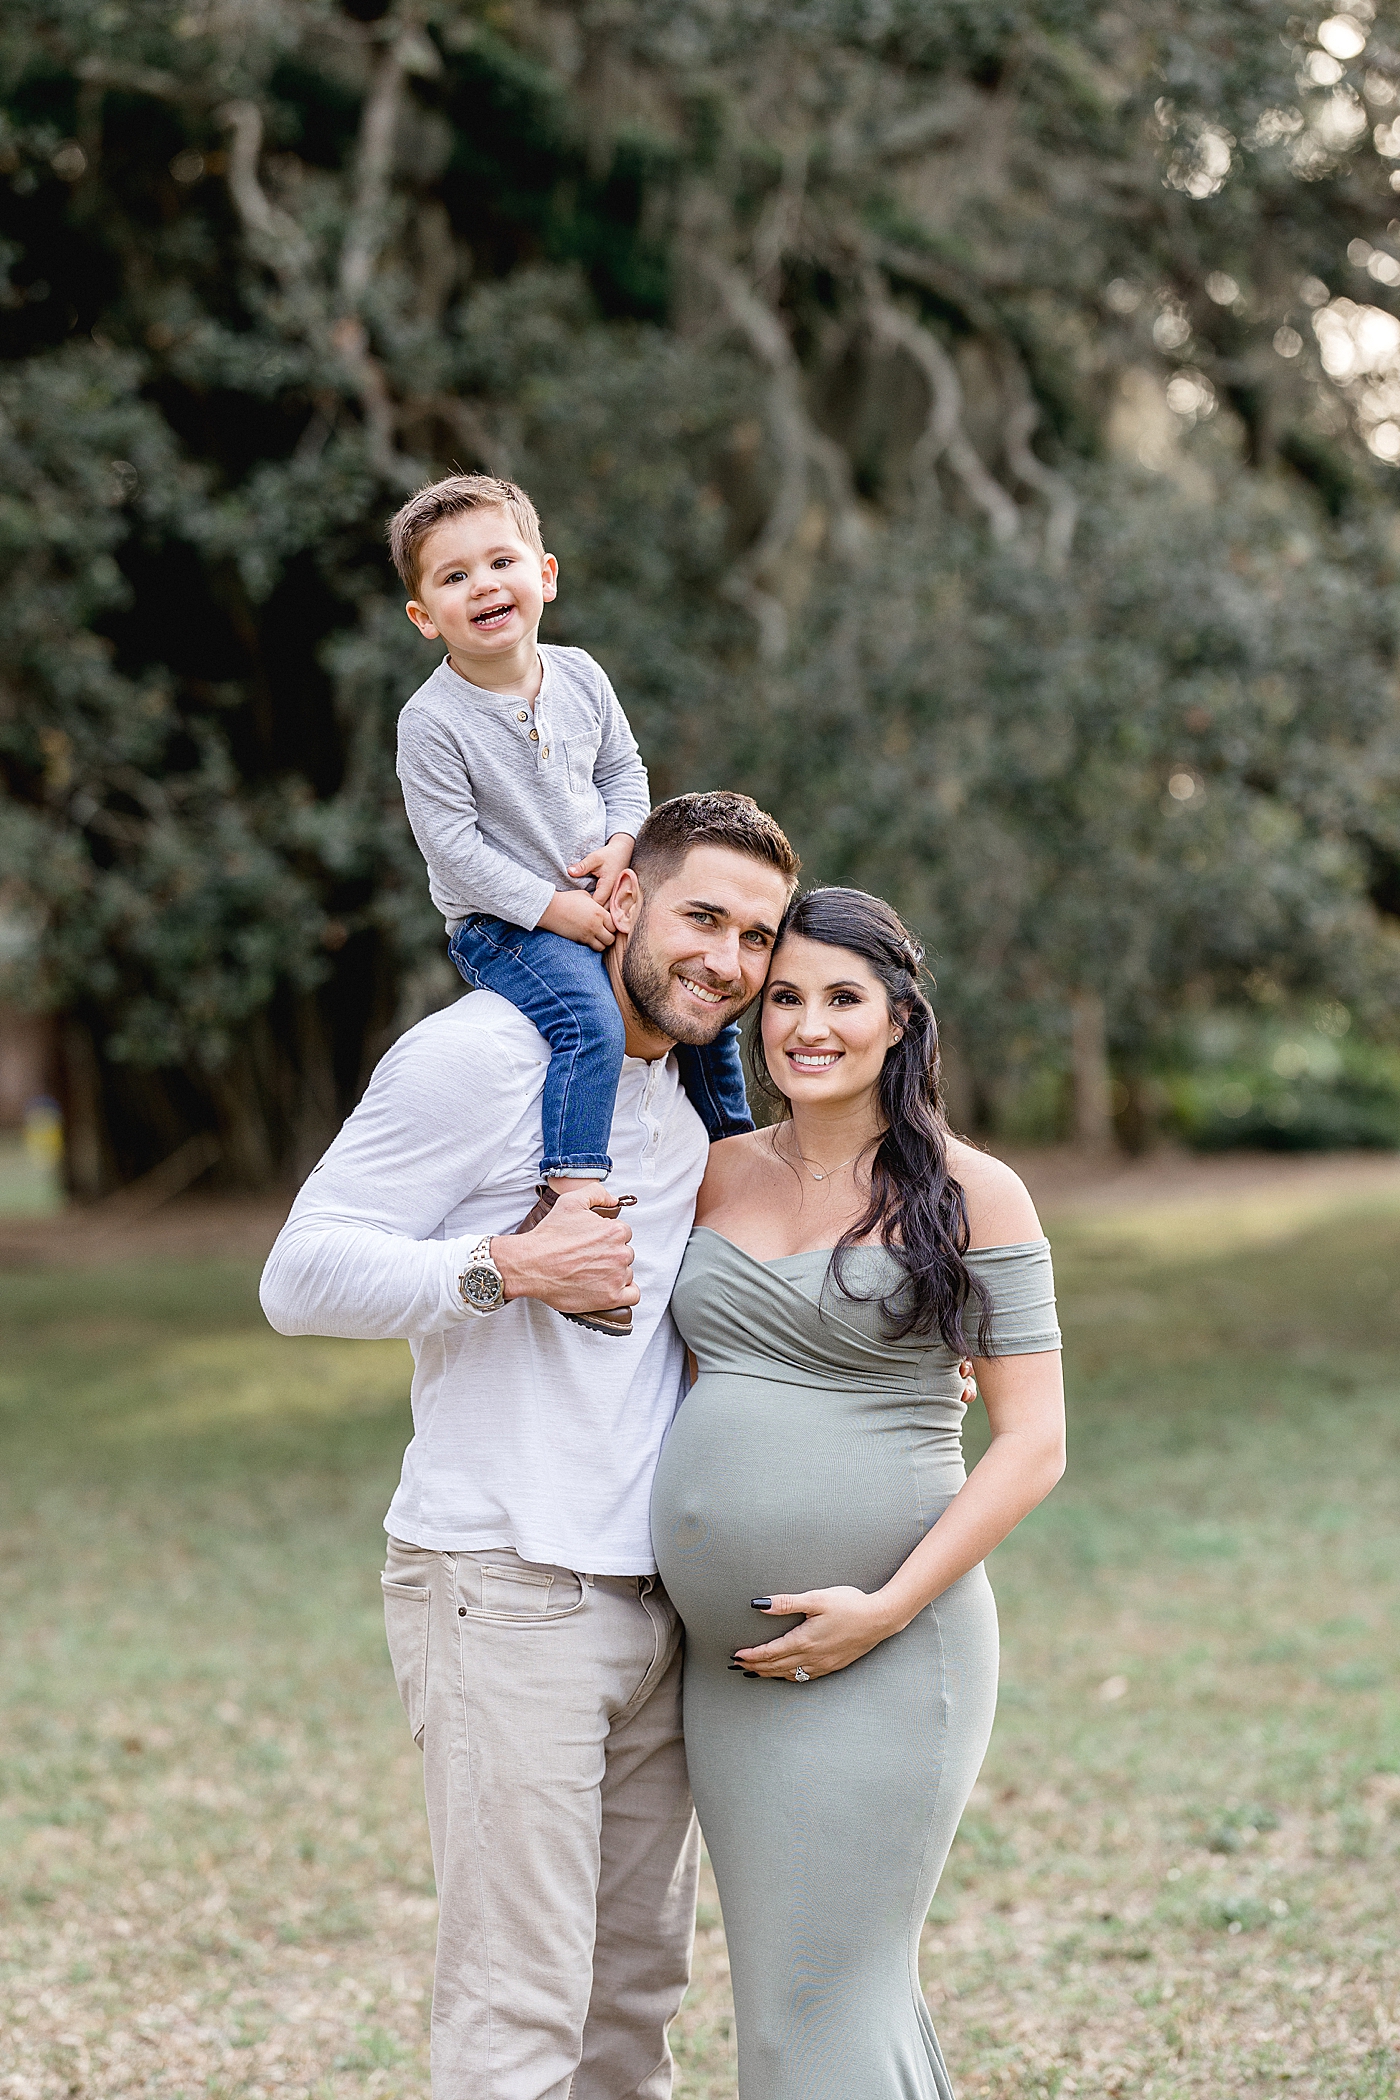 Kiermaier family maternity session under the oaks with Tampa maternity and newborn photographer, Brittany Elise Photography.